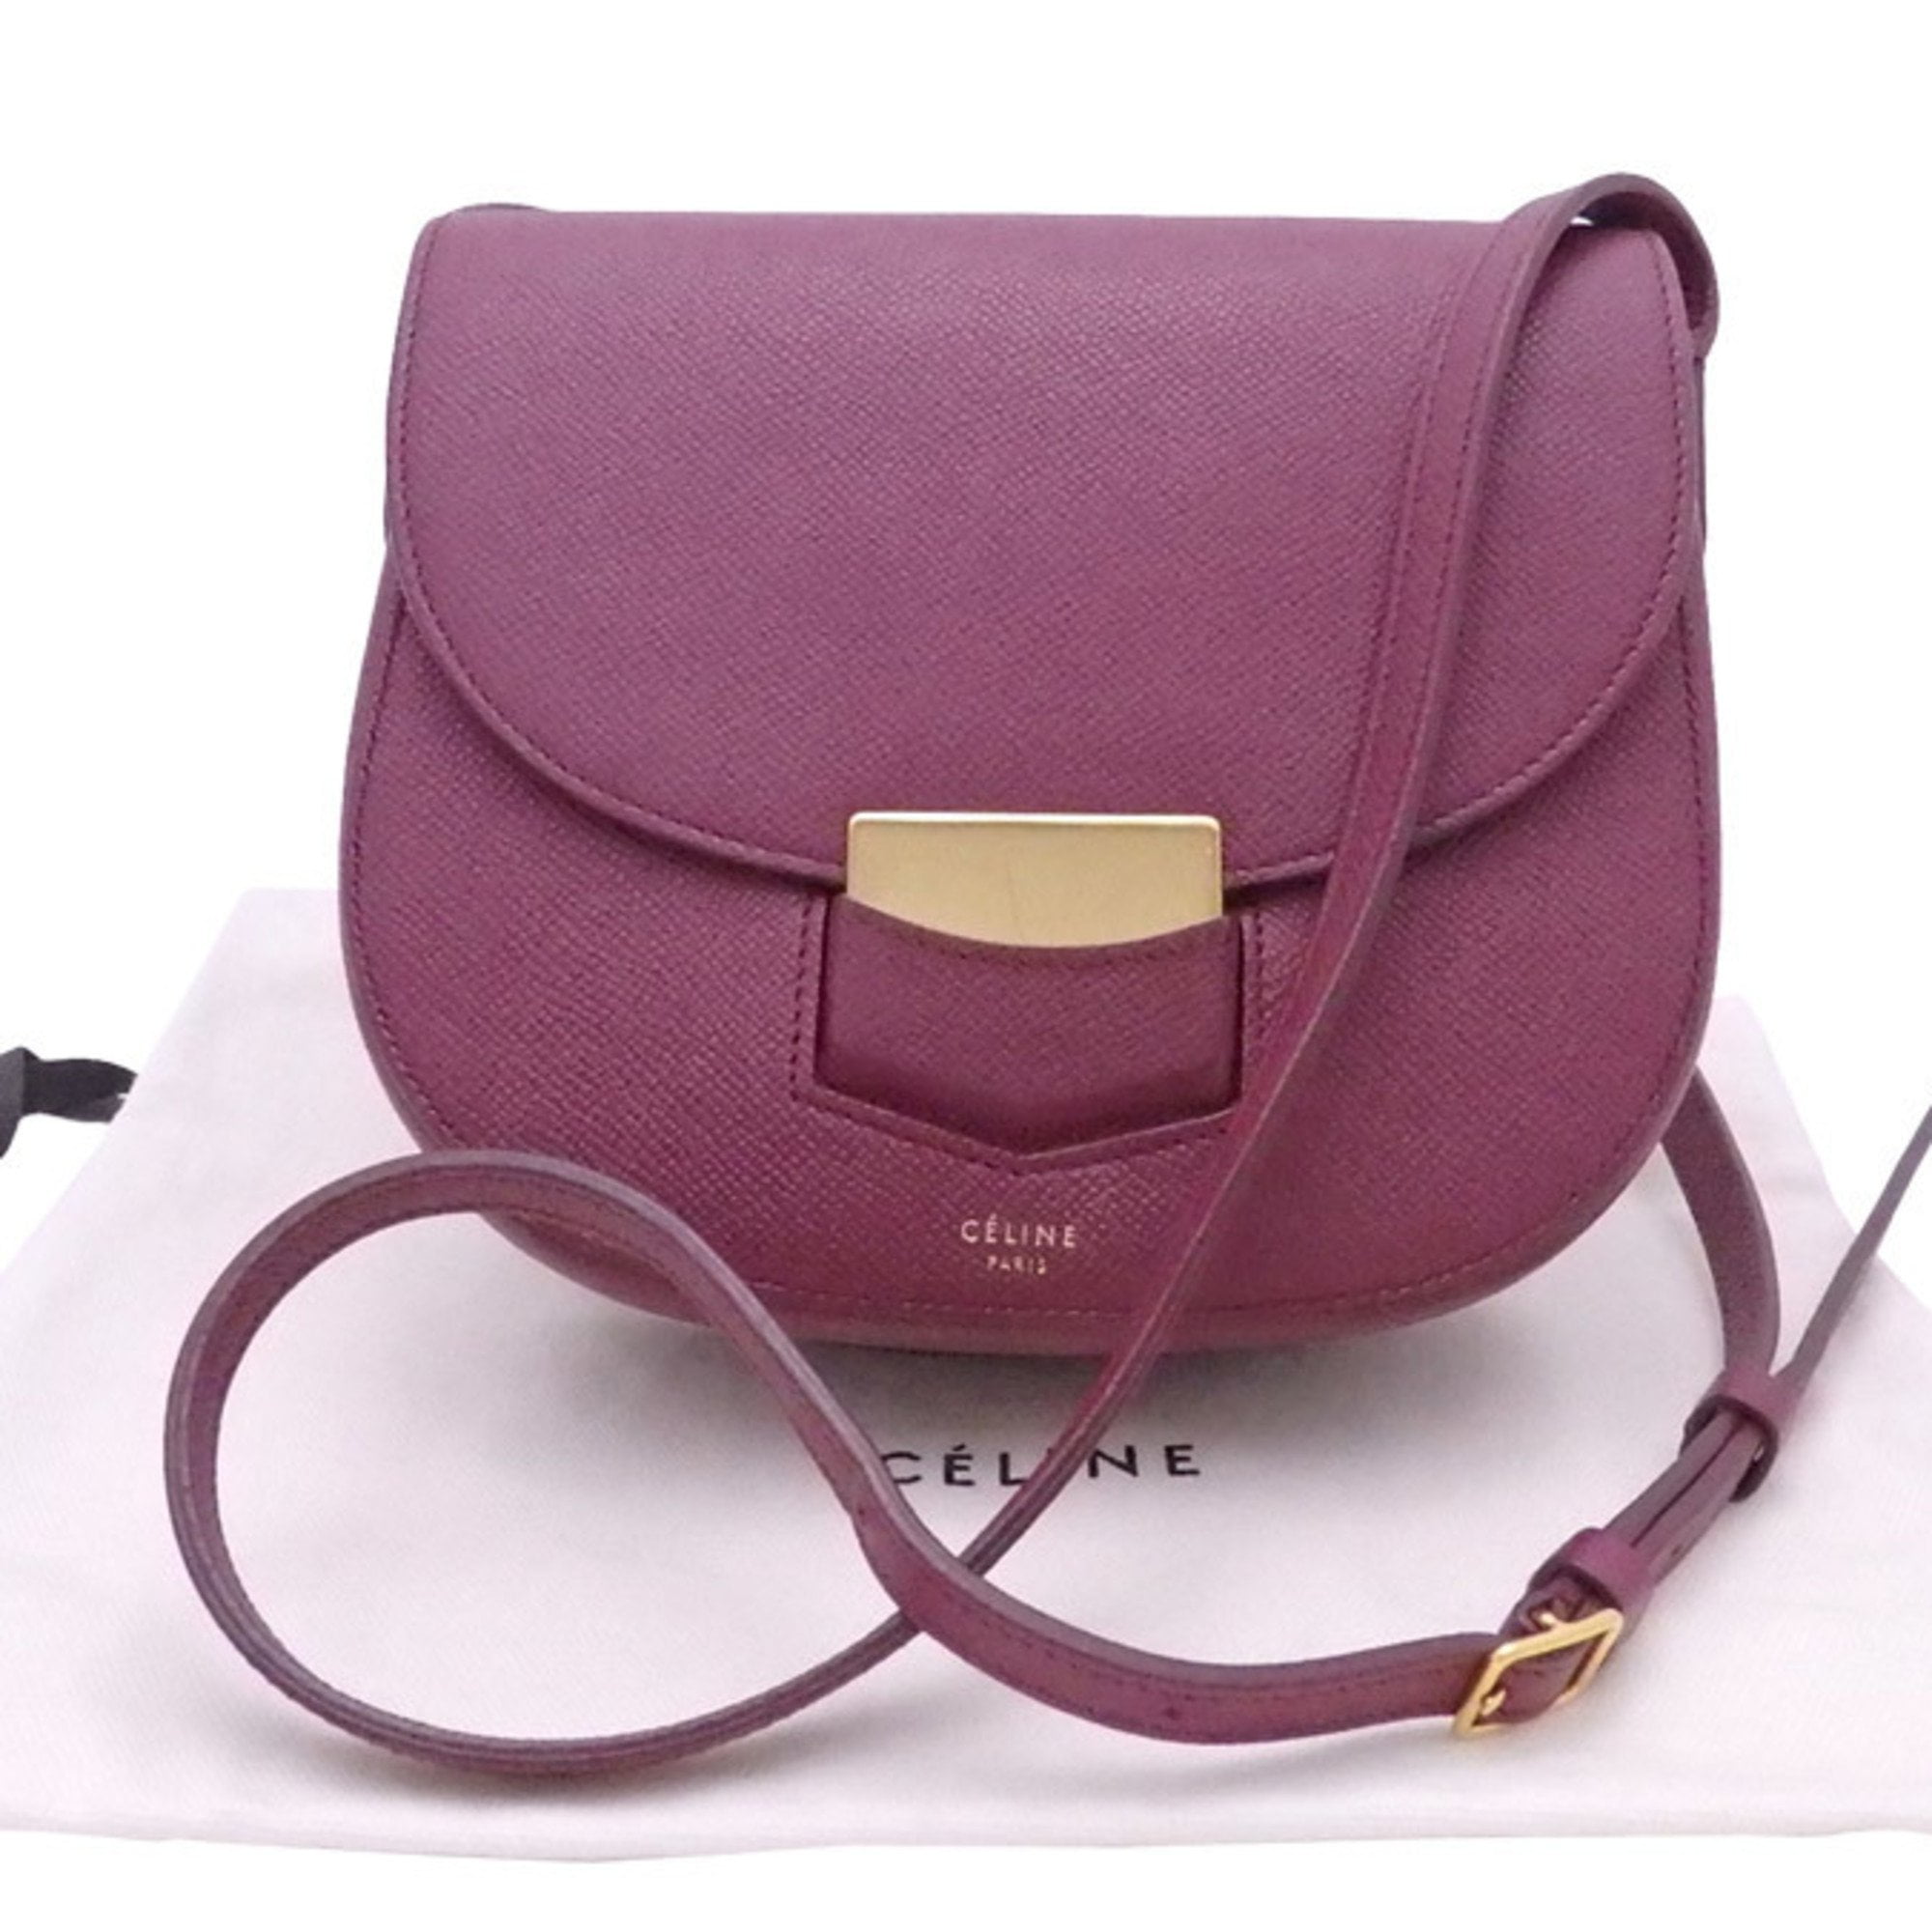 Chloé - Authenticated Handbag - Leather Purple for Women, Very Good Condition